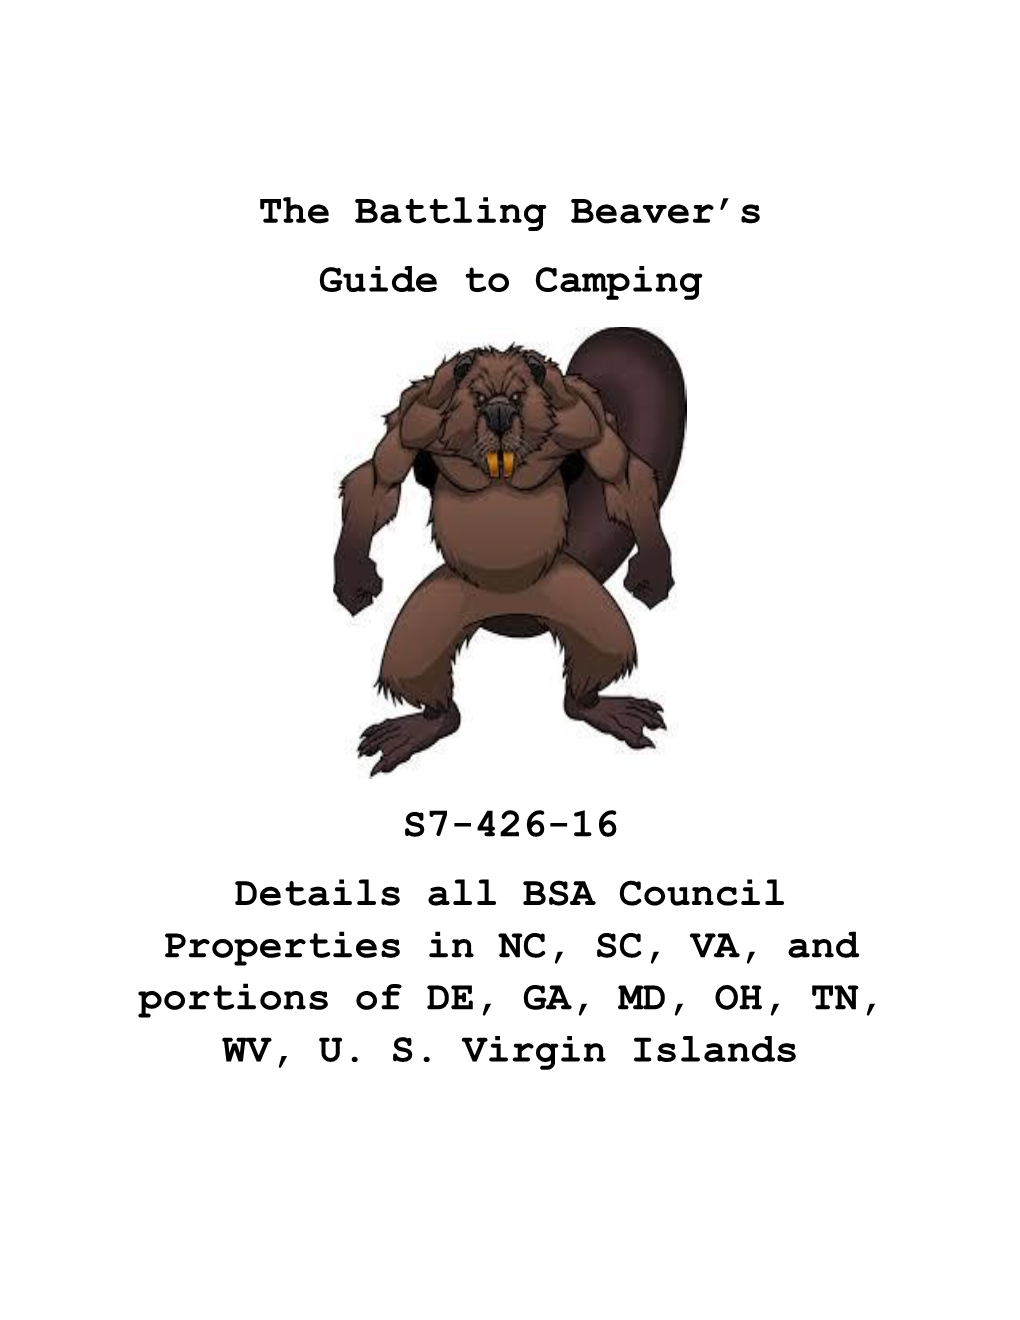 The Battling Beaver's Guide to Camping S7-426-16 Details All BSA Council Properties in NC, SC, VA, and Portions of DE, GA, MD